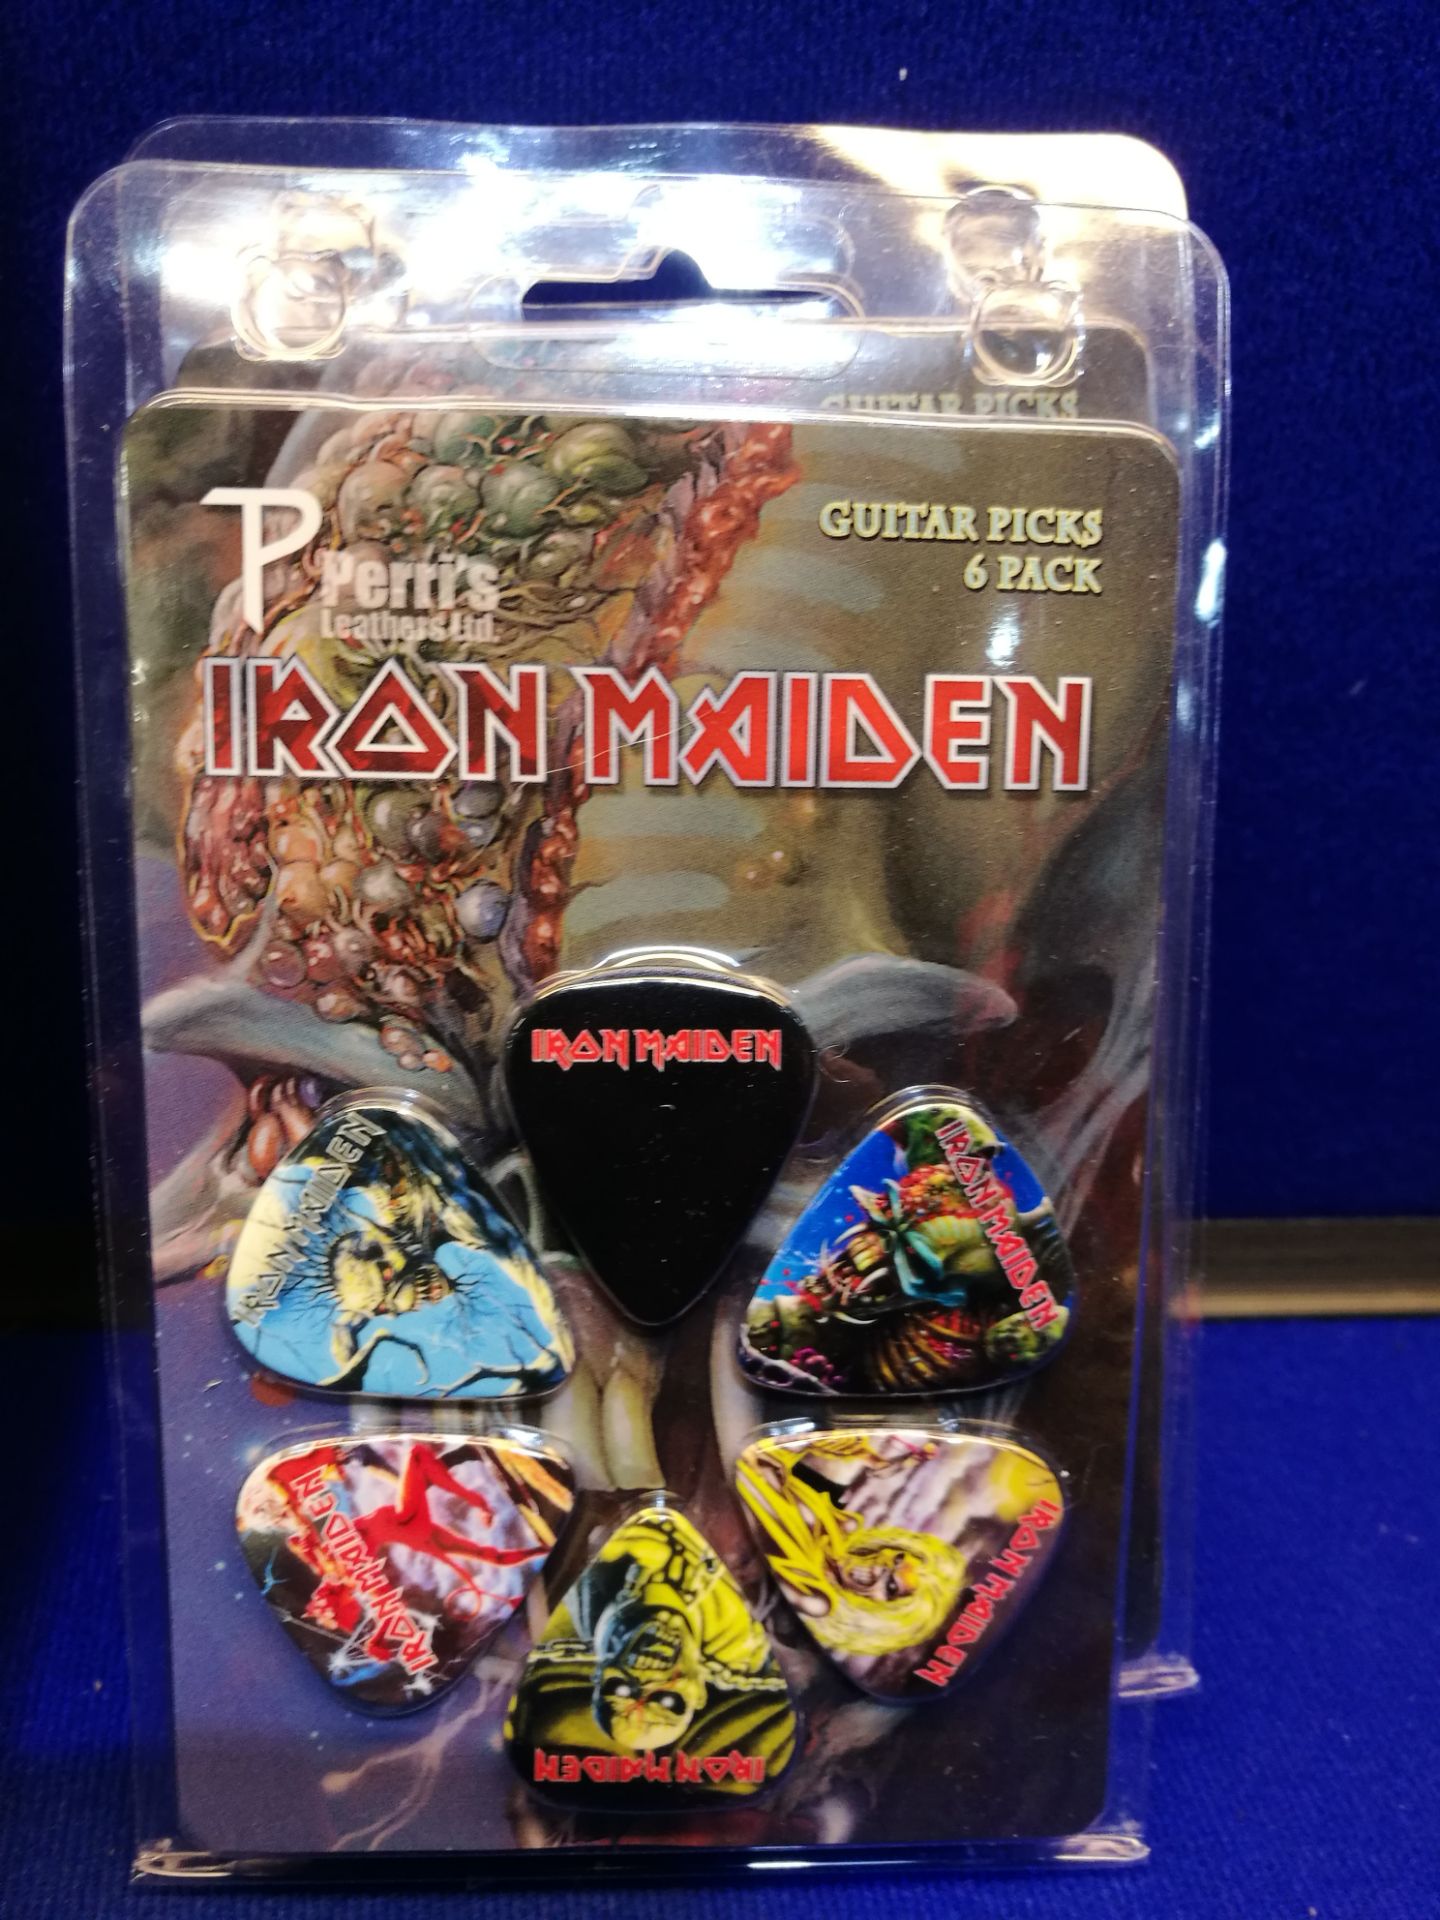 Assortment of Iron Maiden Themed Pick Packs - 2 Variants, 7 Packs Total - Image 3 of 3